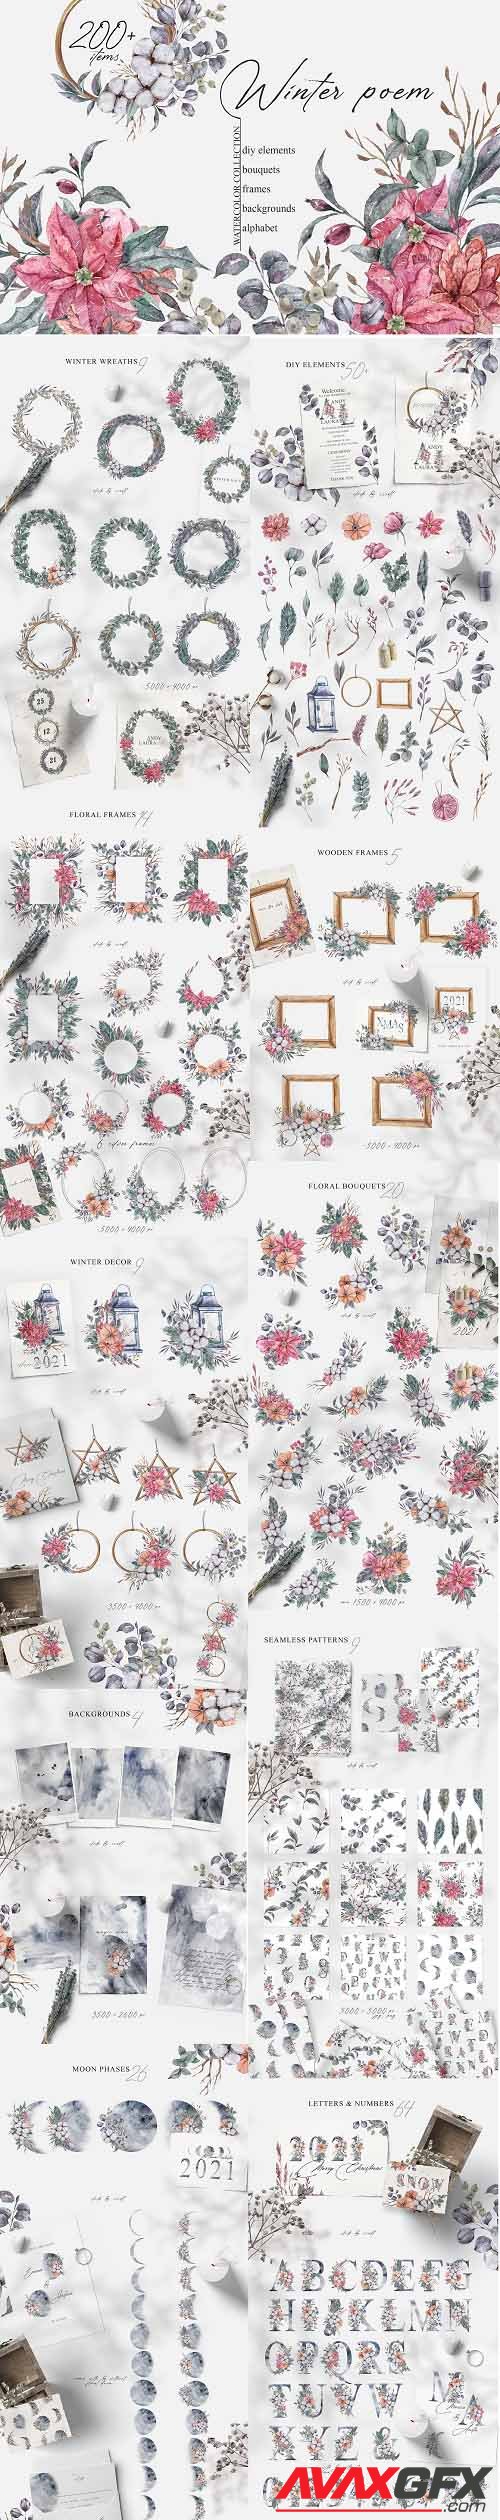 Watercolor Christmas floral clipart - 6598967